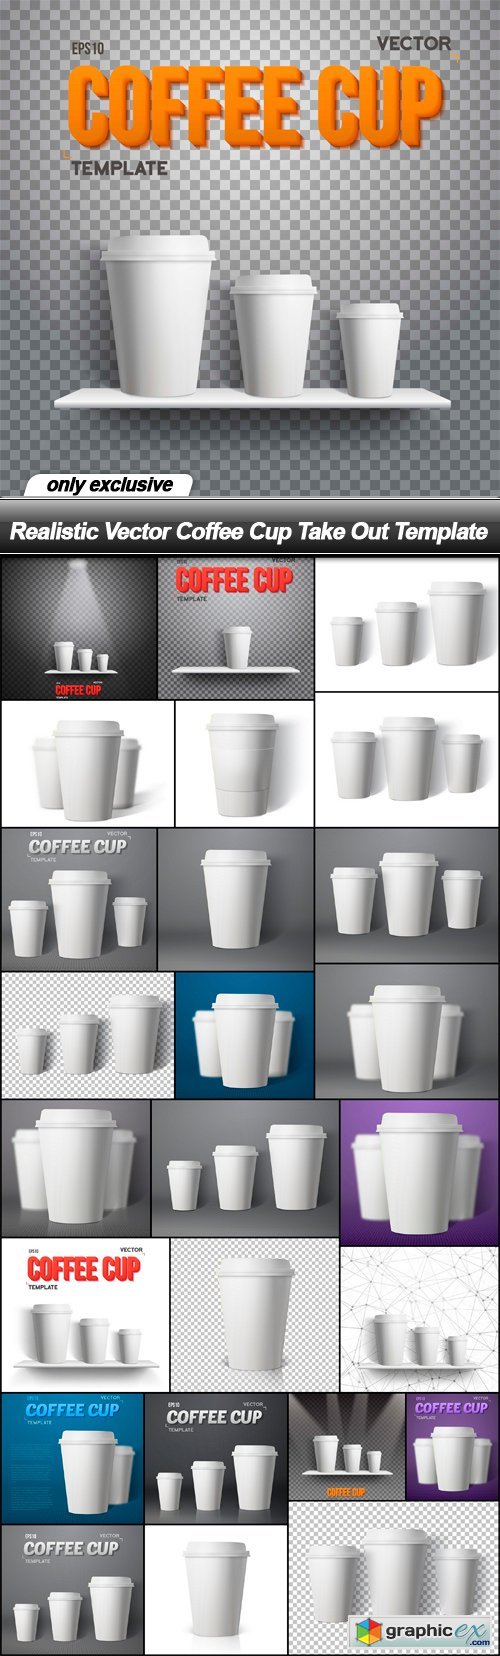 Realistic Vector Coffee Cup Take Out Template - 26 EPS